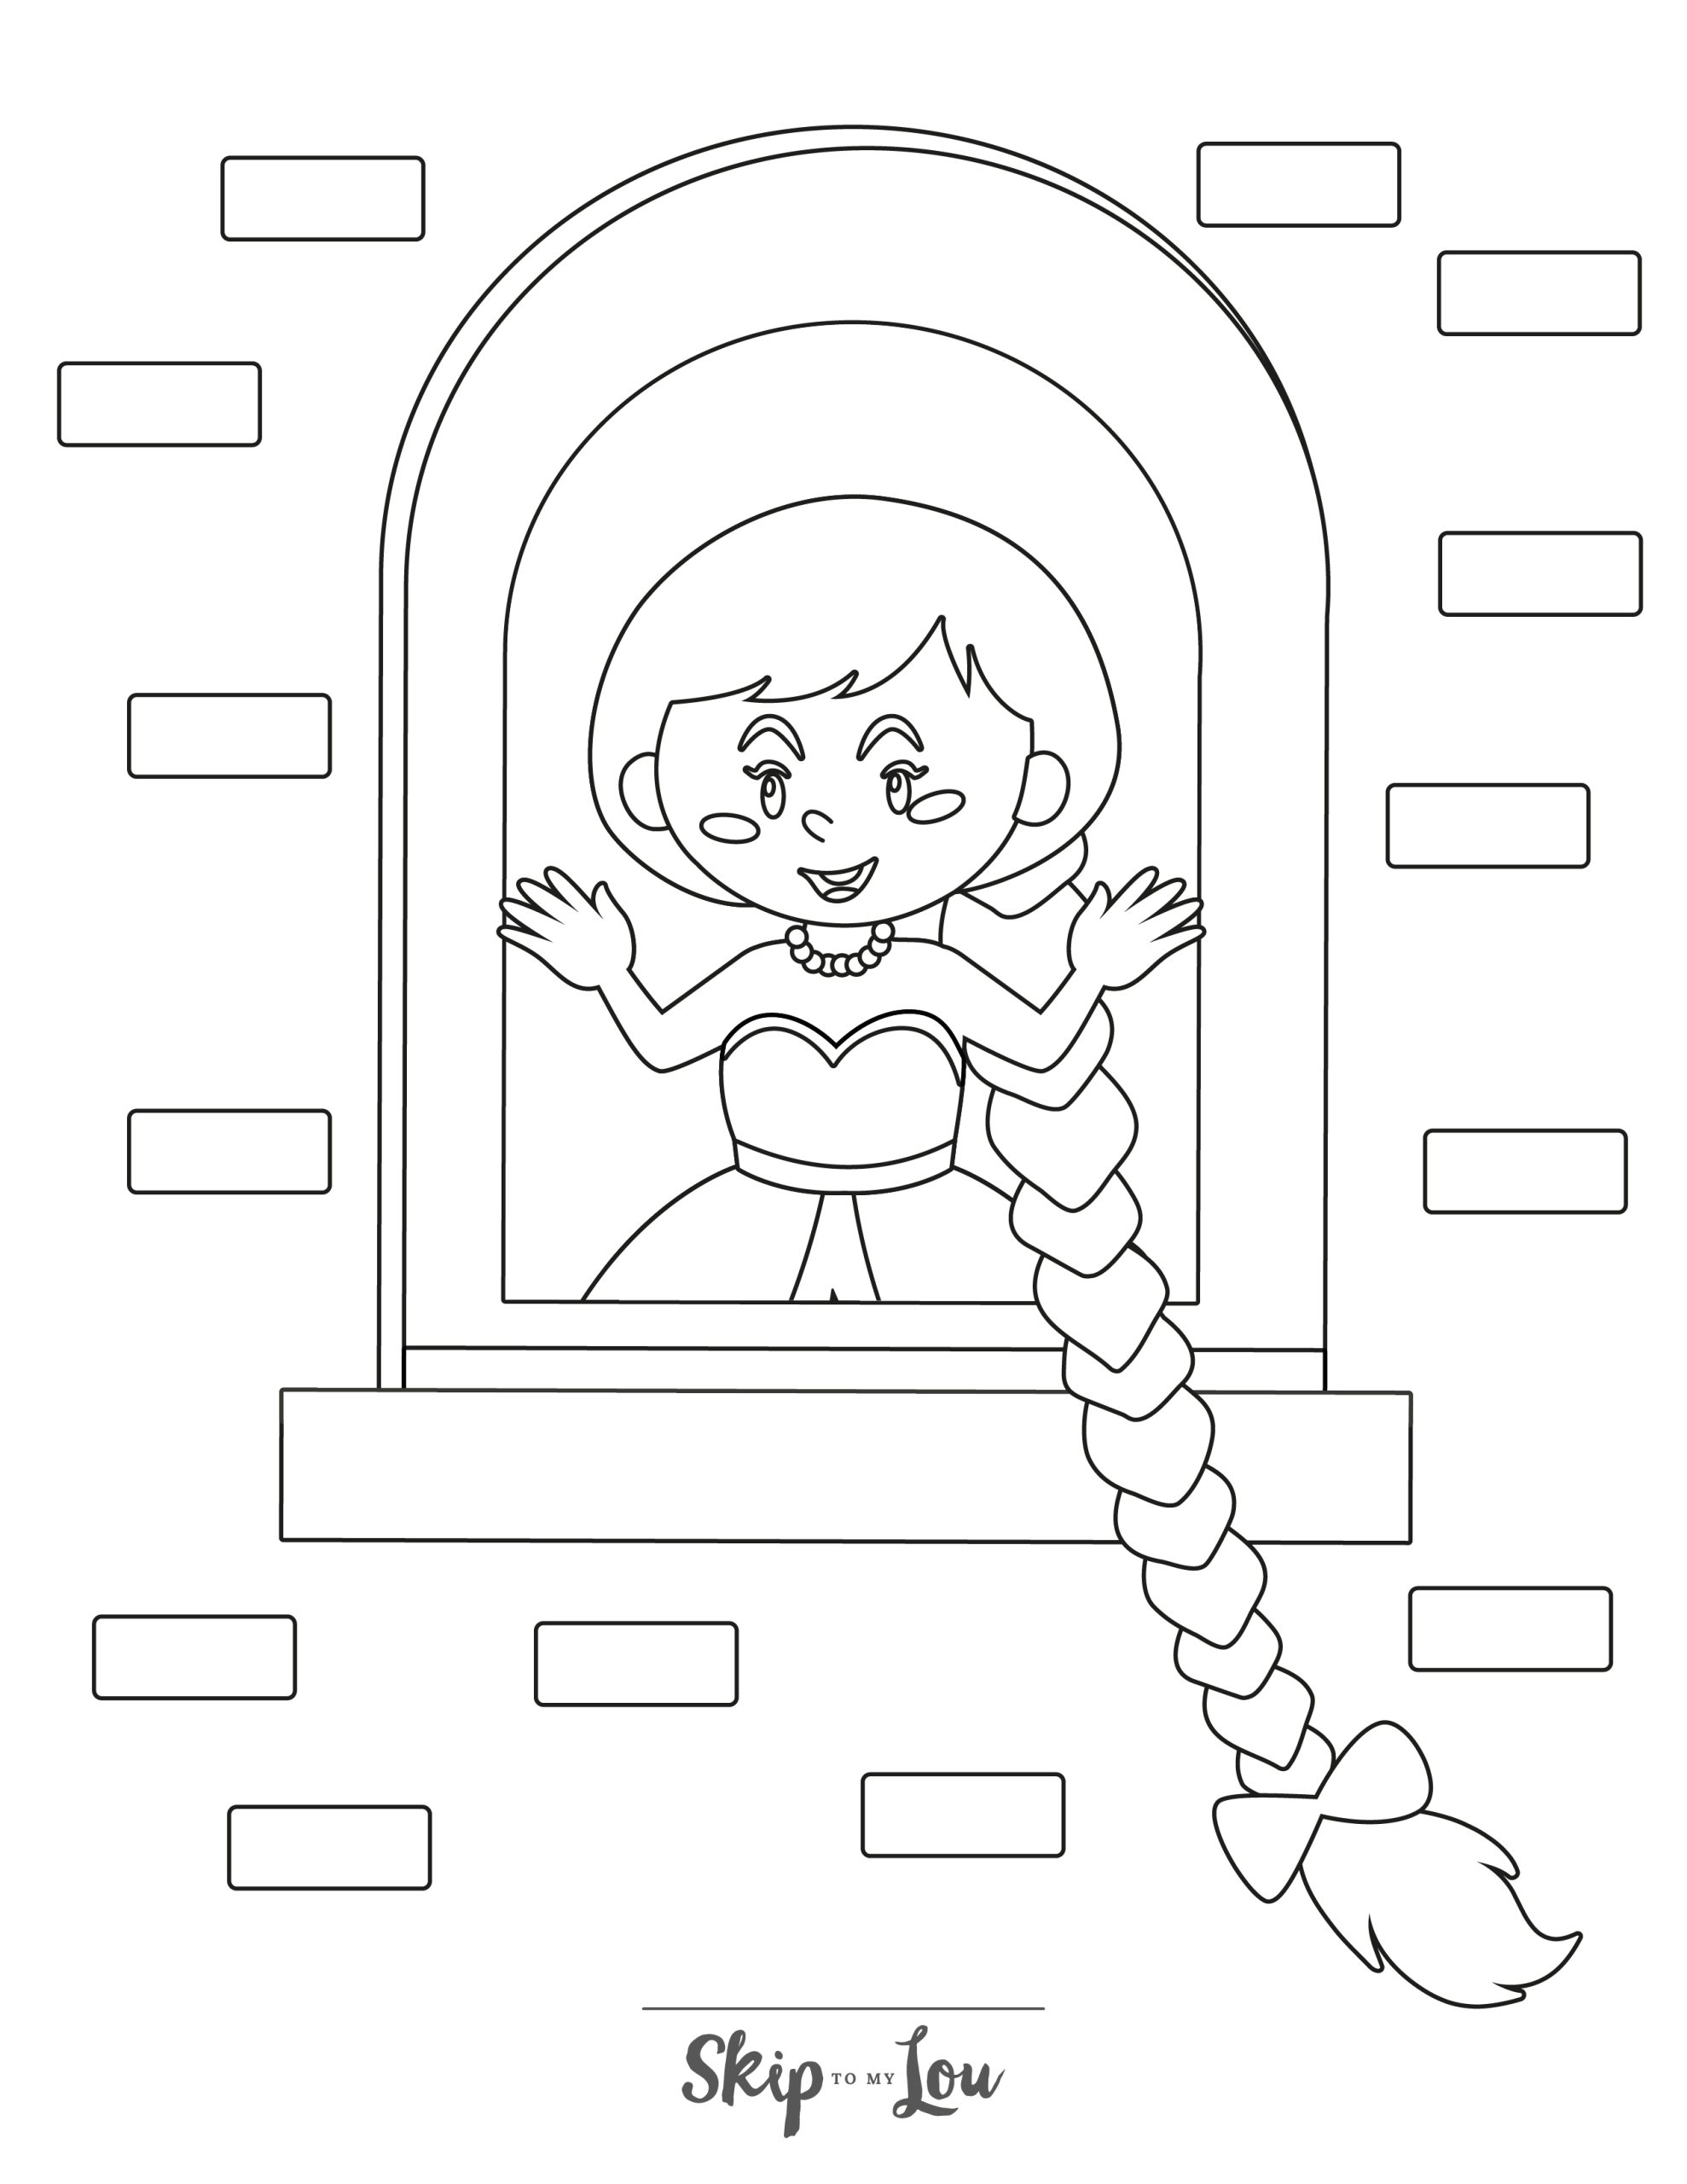 Rapunzel Coloring Page 1 - Line drawing of Rapunzel at the tower window